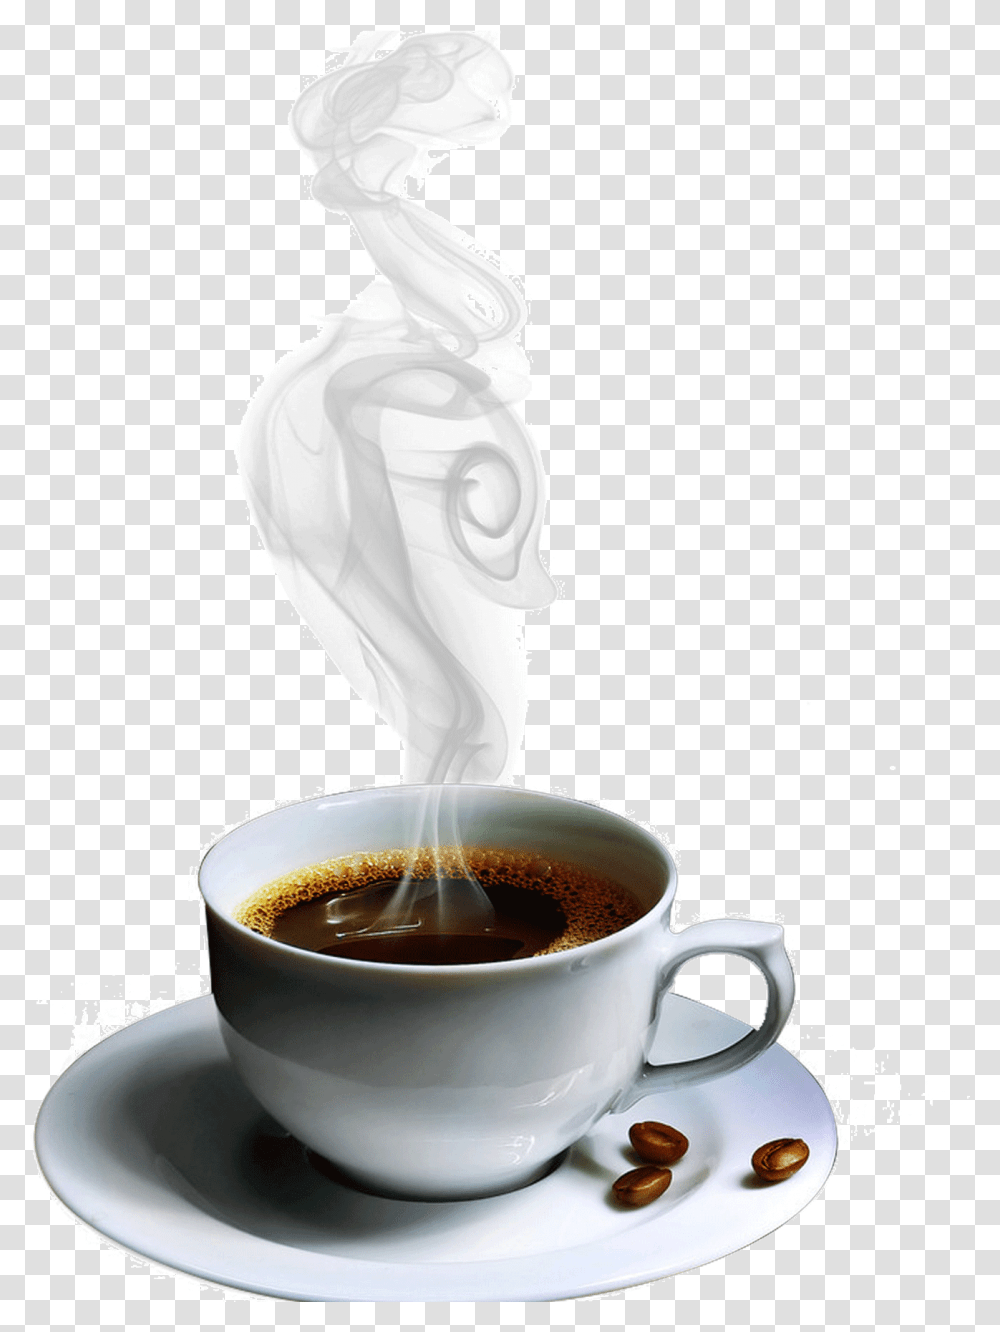 Coffee Tea Cafe Hot Chocolate Coffee Cup Steam, Wedding Cake, Dessert, Food, Beverage Transparent Png